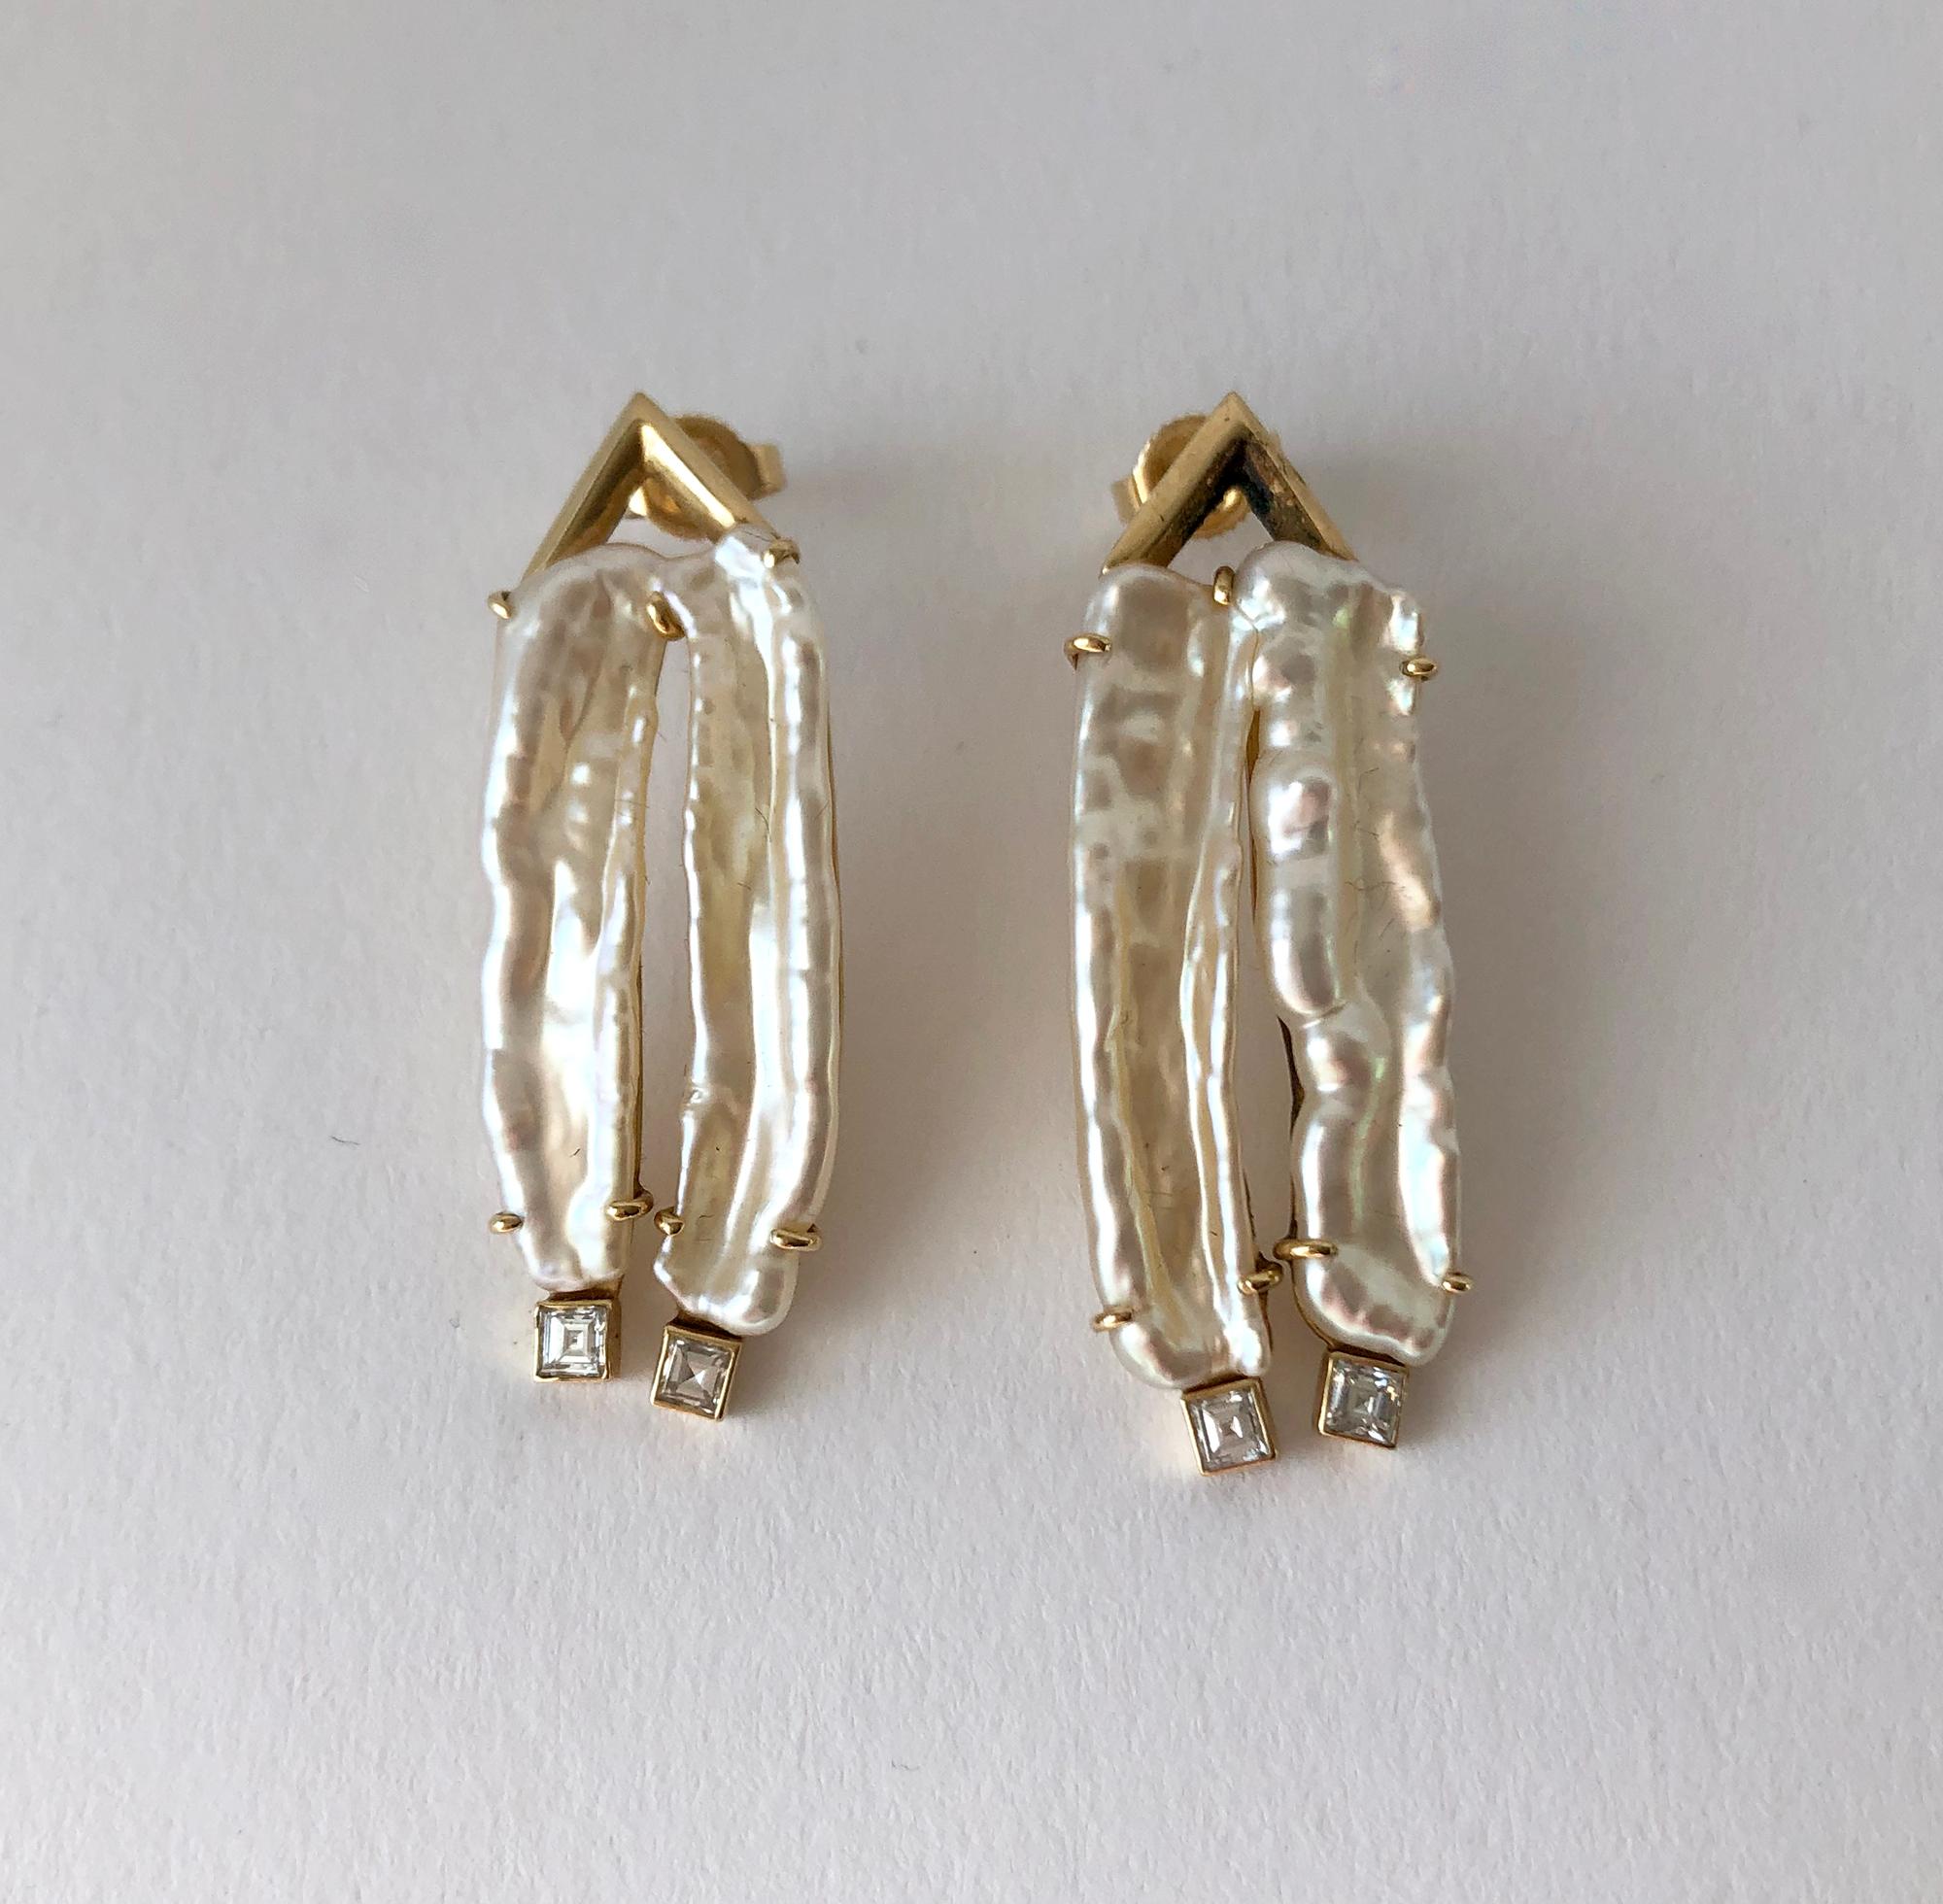 Modern 14K gold pierced earrings with step cut diamonds and freshwater stick pearls, creator unknown.  Earrings measure 1.5